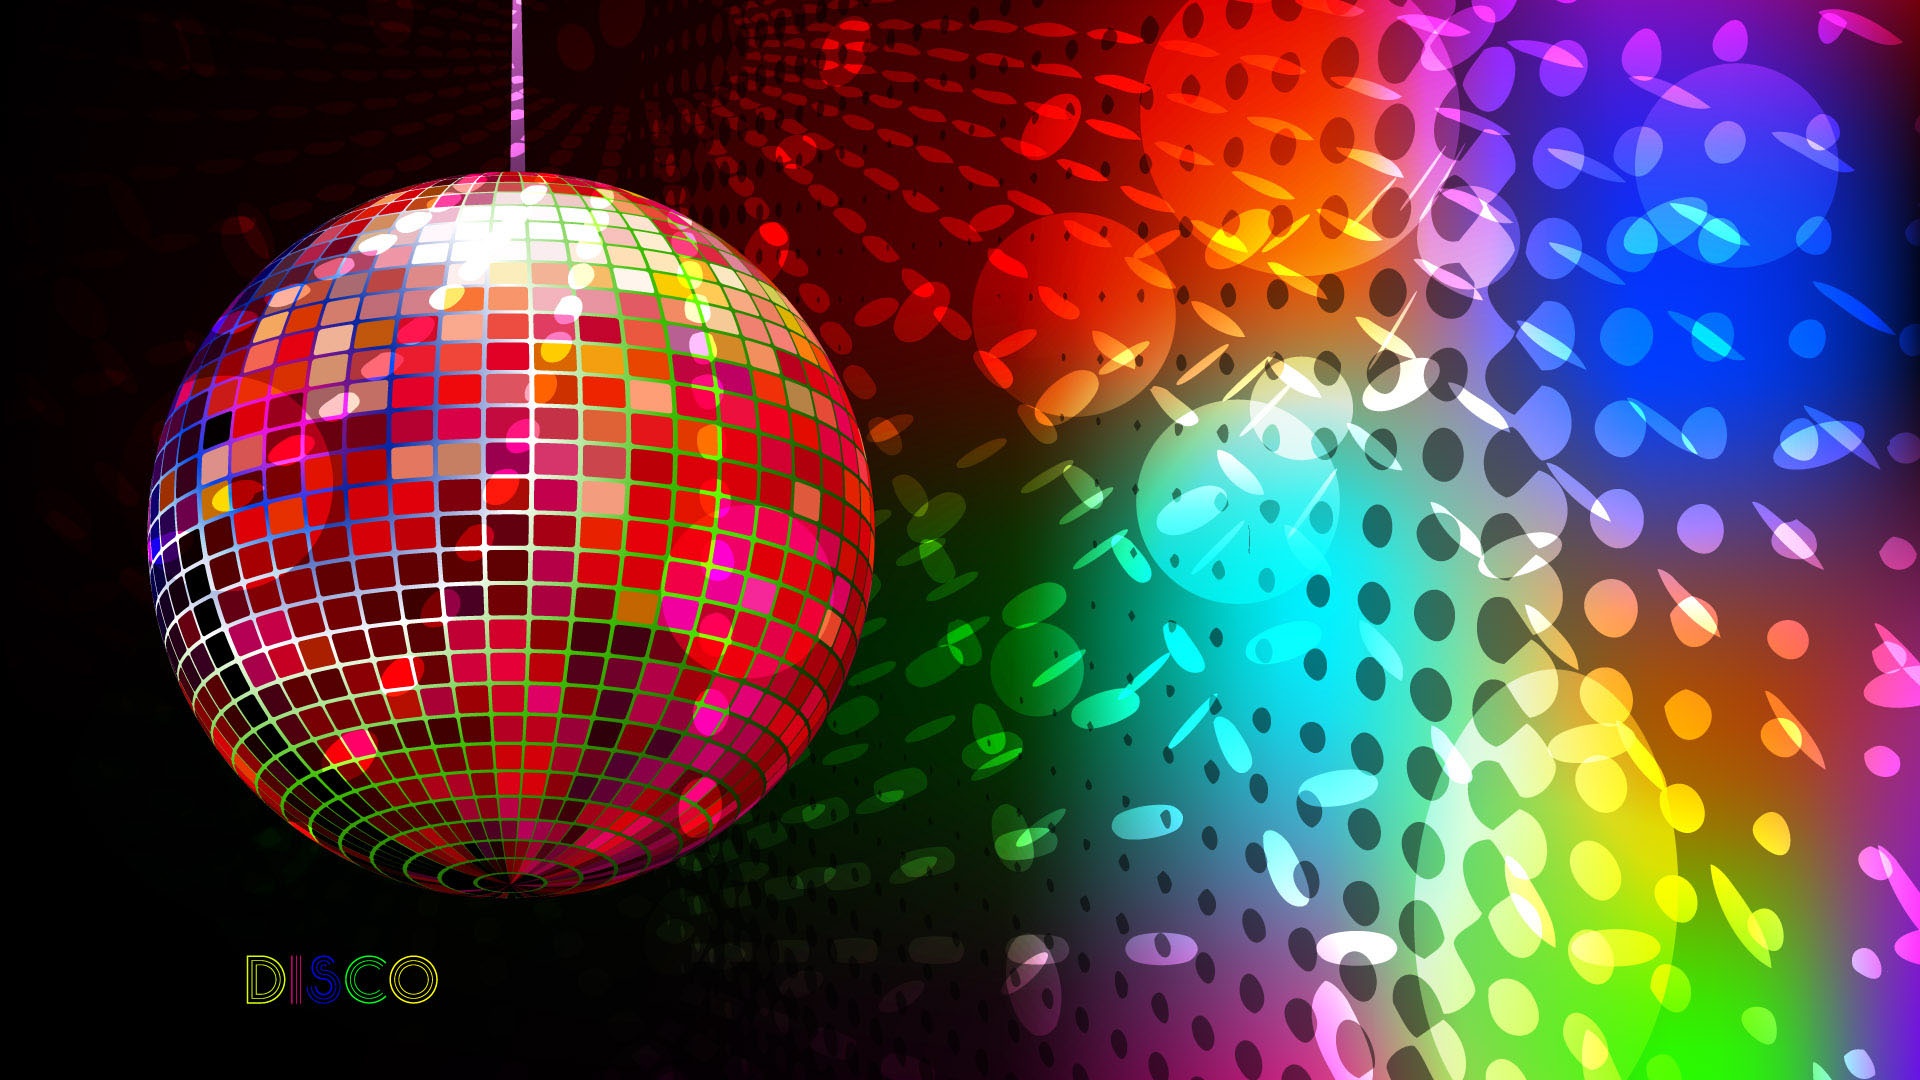 Party Light 3D Effects Wallpapers Party Light 3D Effects Backgrounds